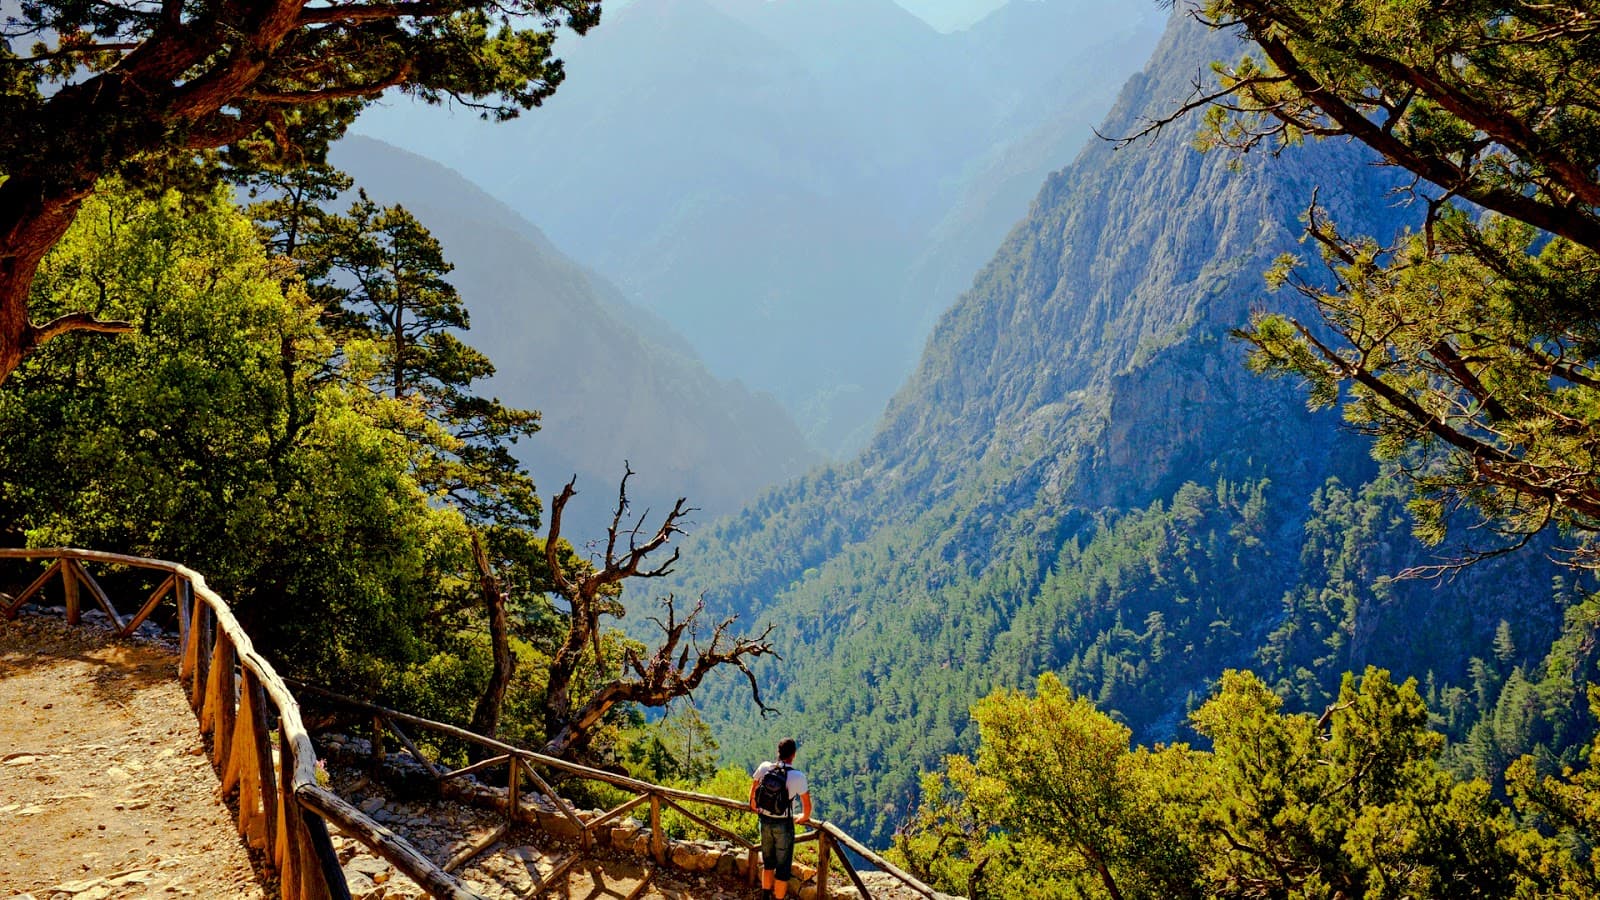 Samaria Gorge (Easy Way) From Chania